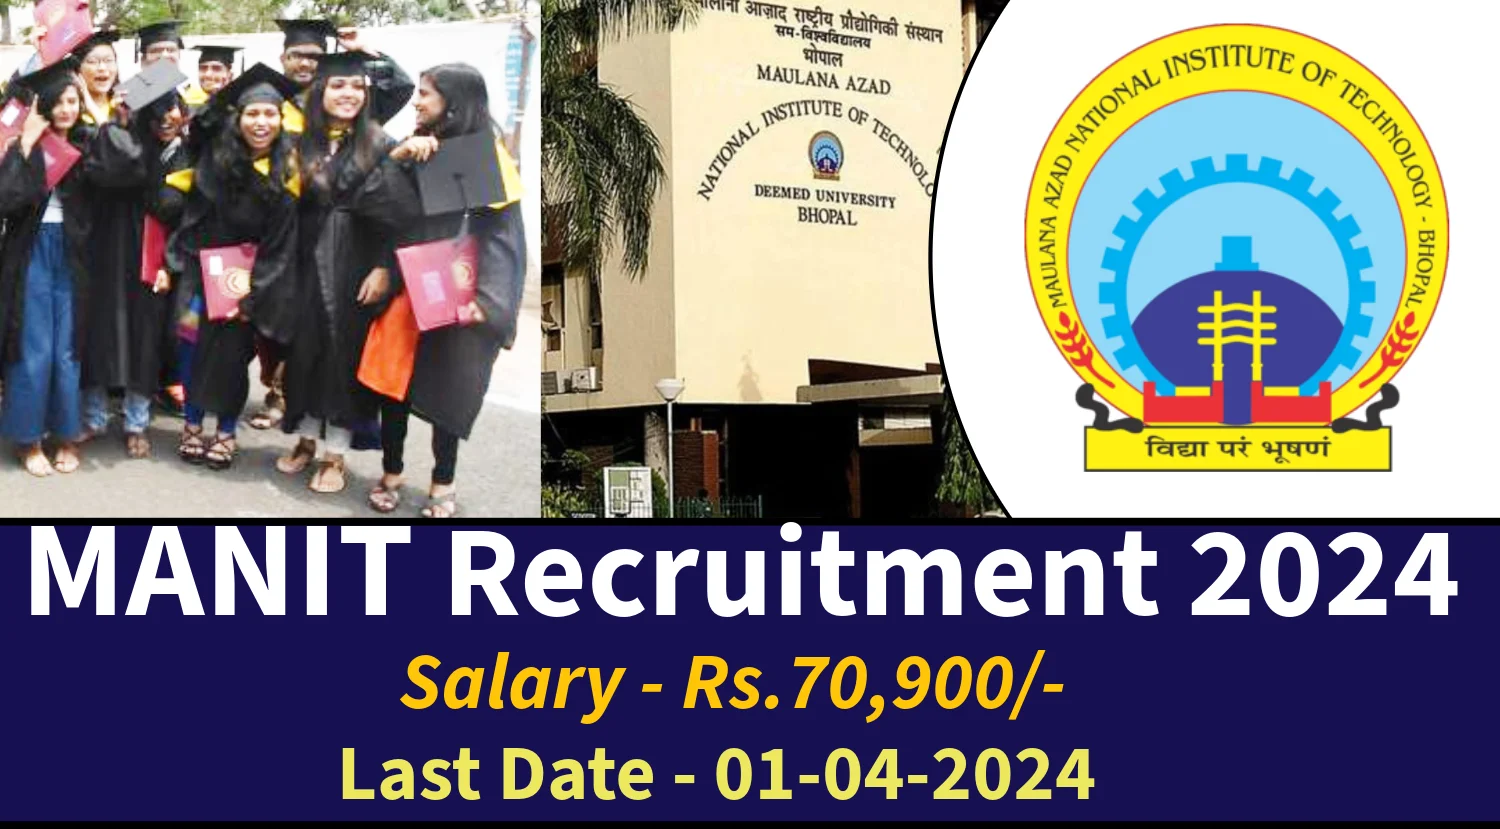 MANIT Faculty Recruitment 2024 Notification Out for 84 Posts